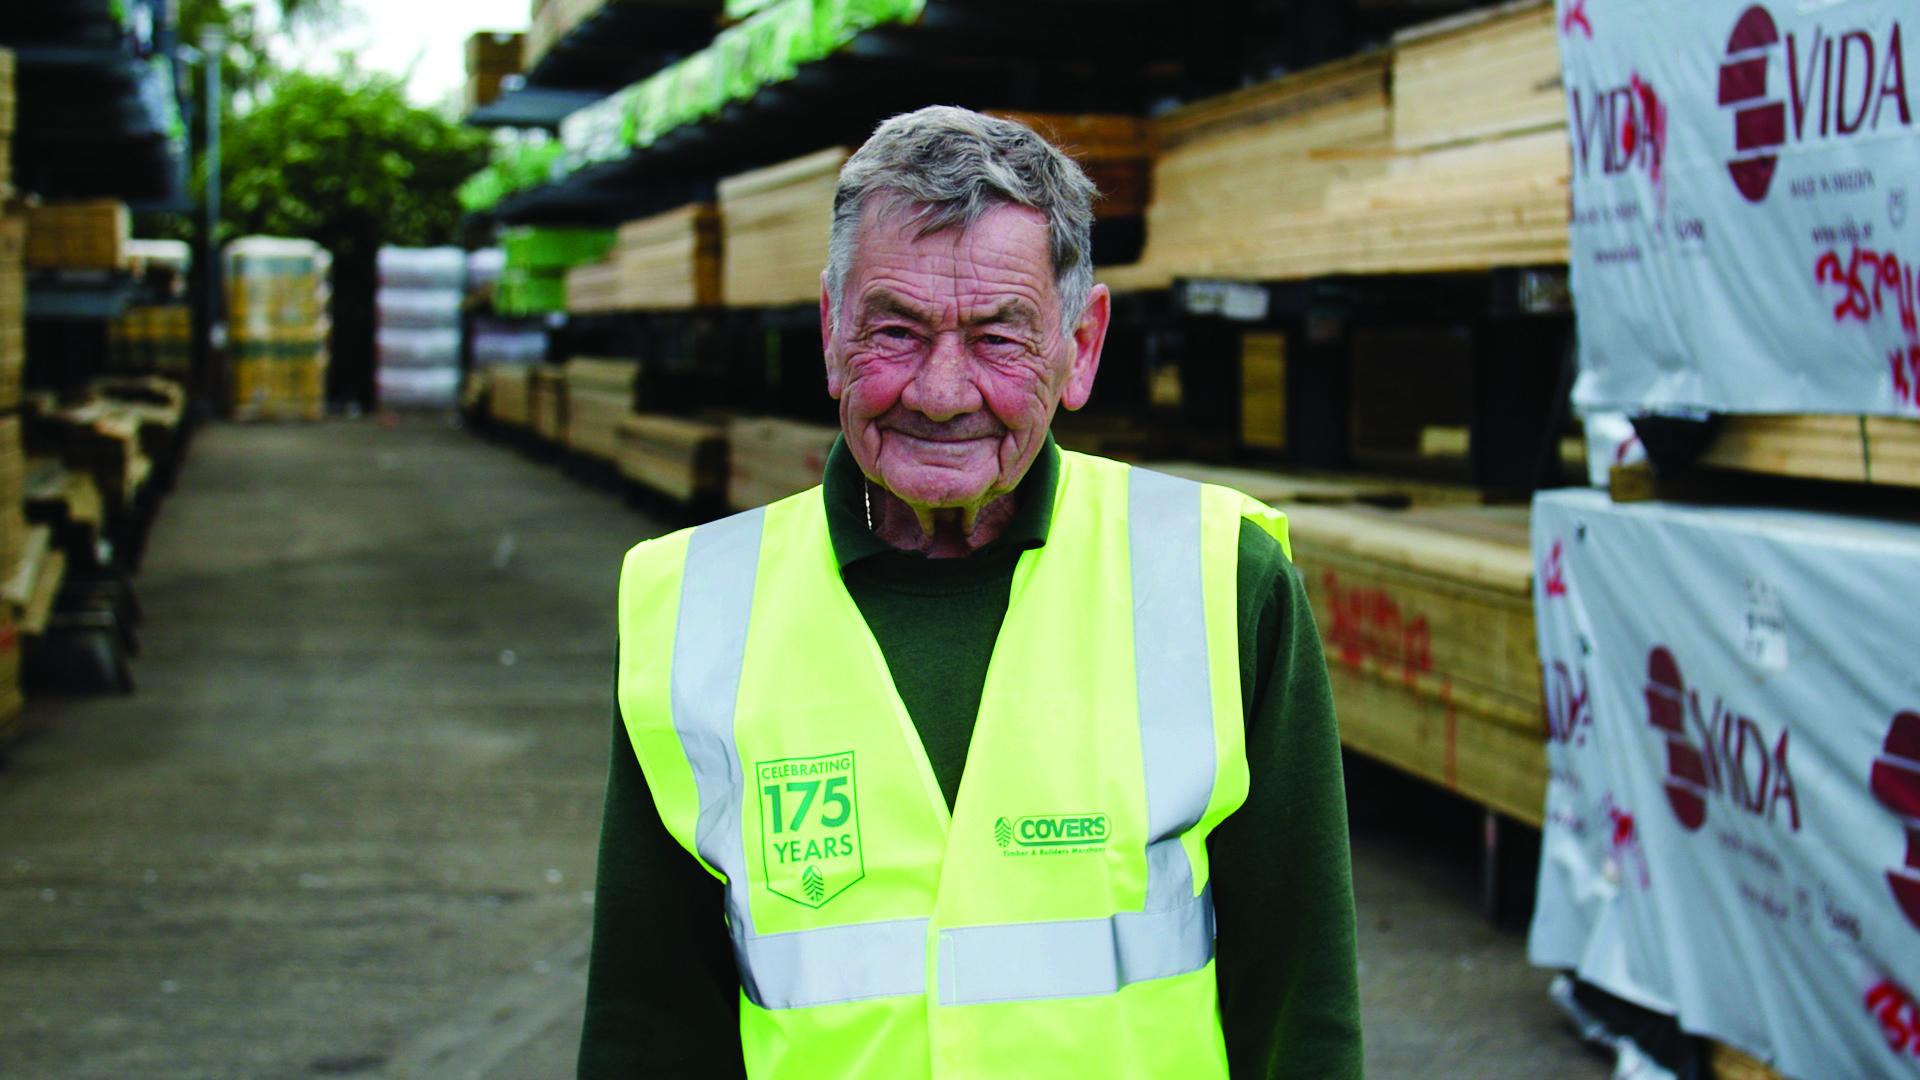 Portsmouth employee becomes company’s longest serving team member